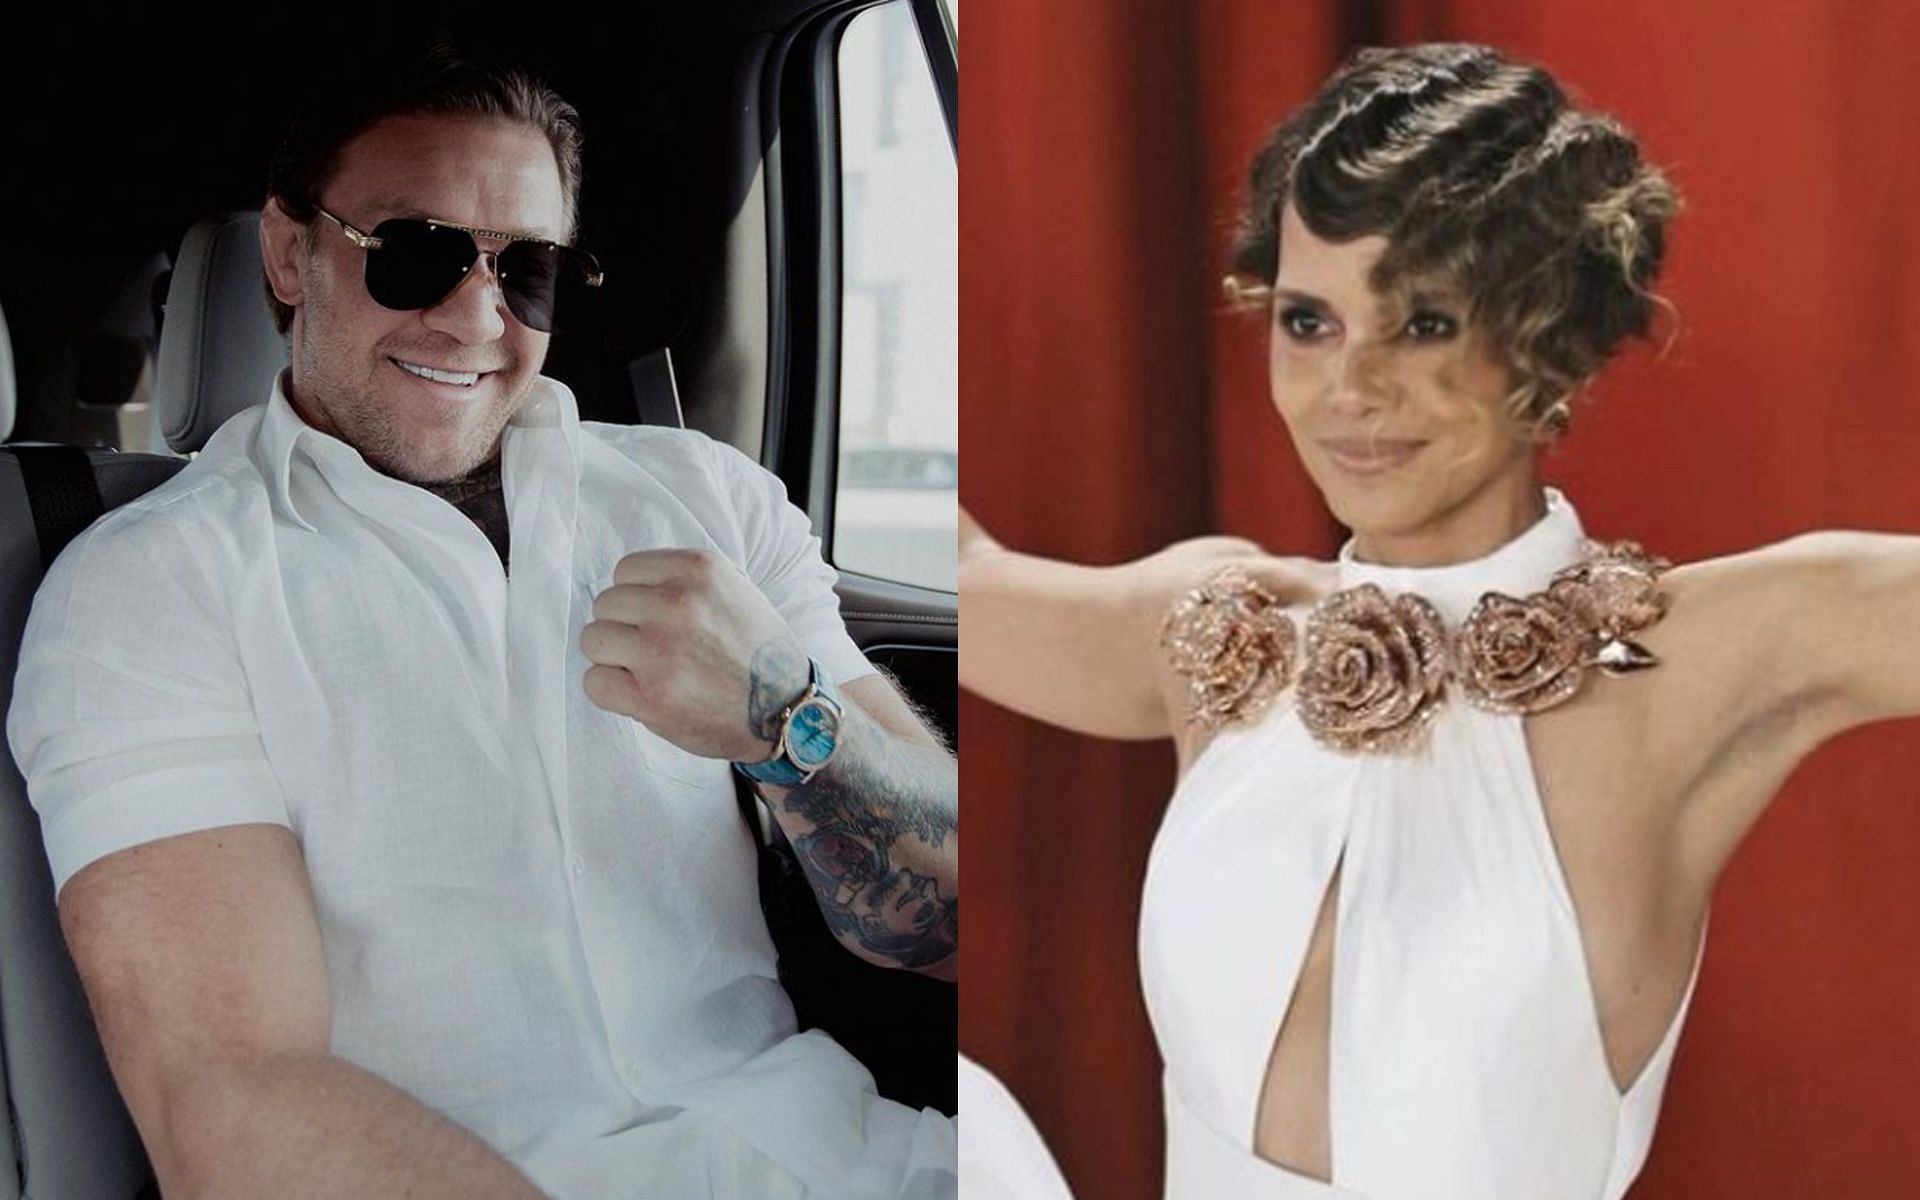 Conor McGregor (left) and Halle Berry (right) (Images via @thenotoriousmma and @halleberry Instagram)